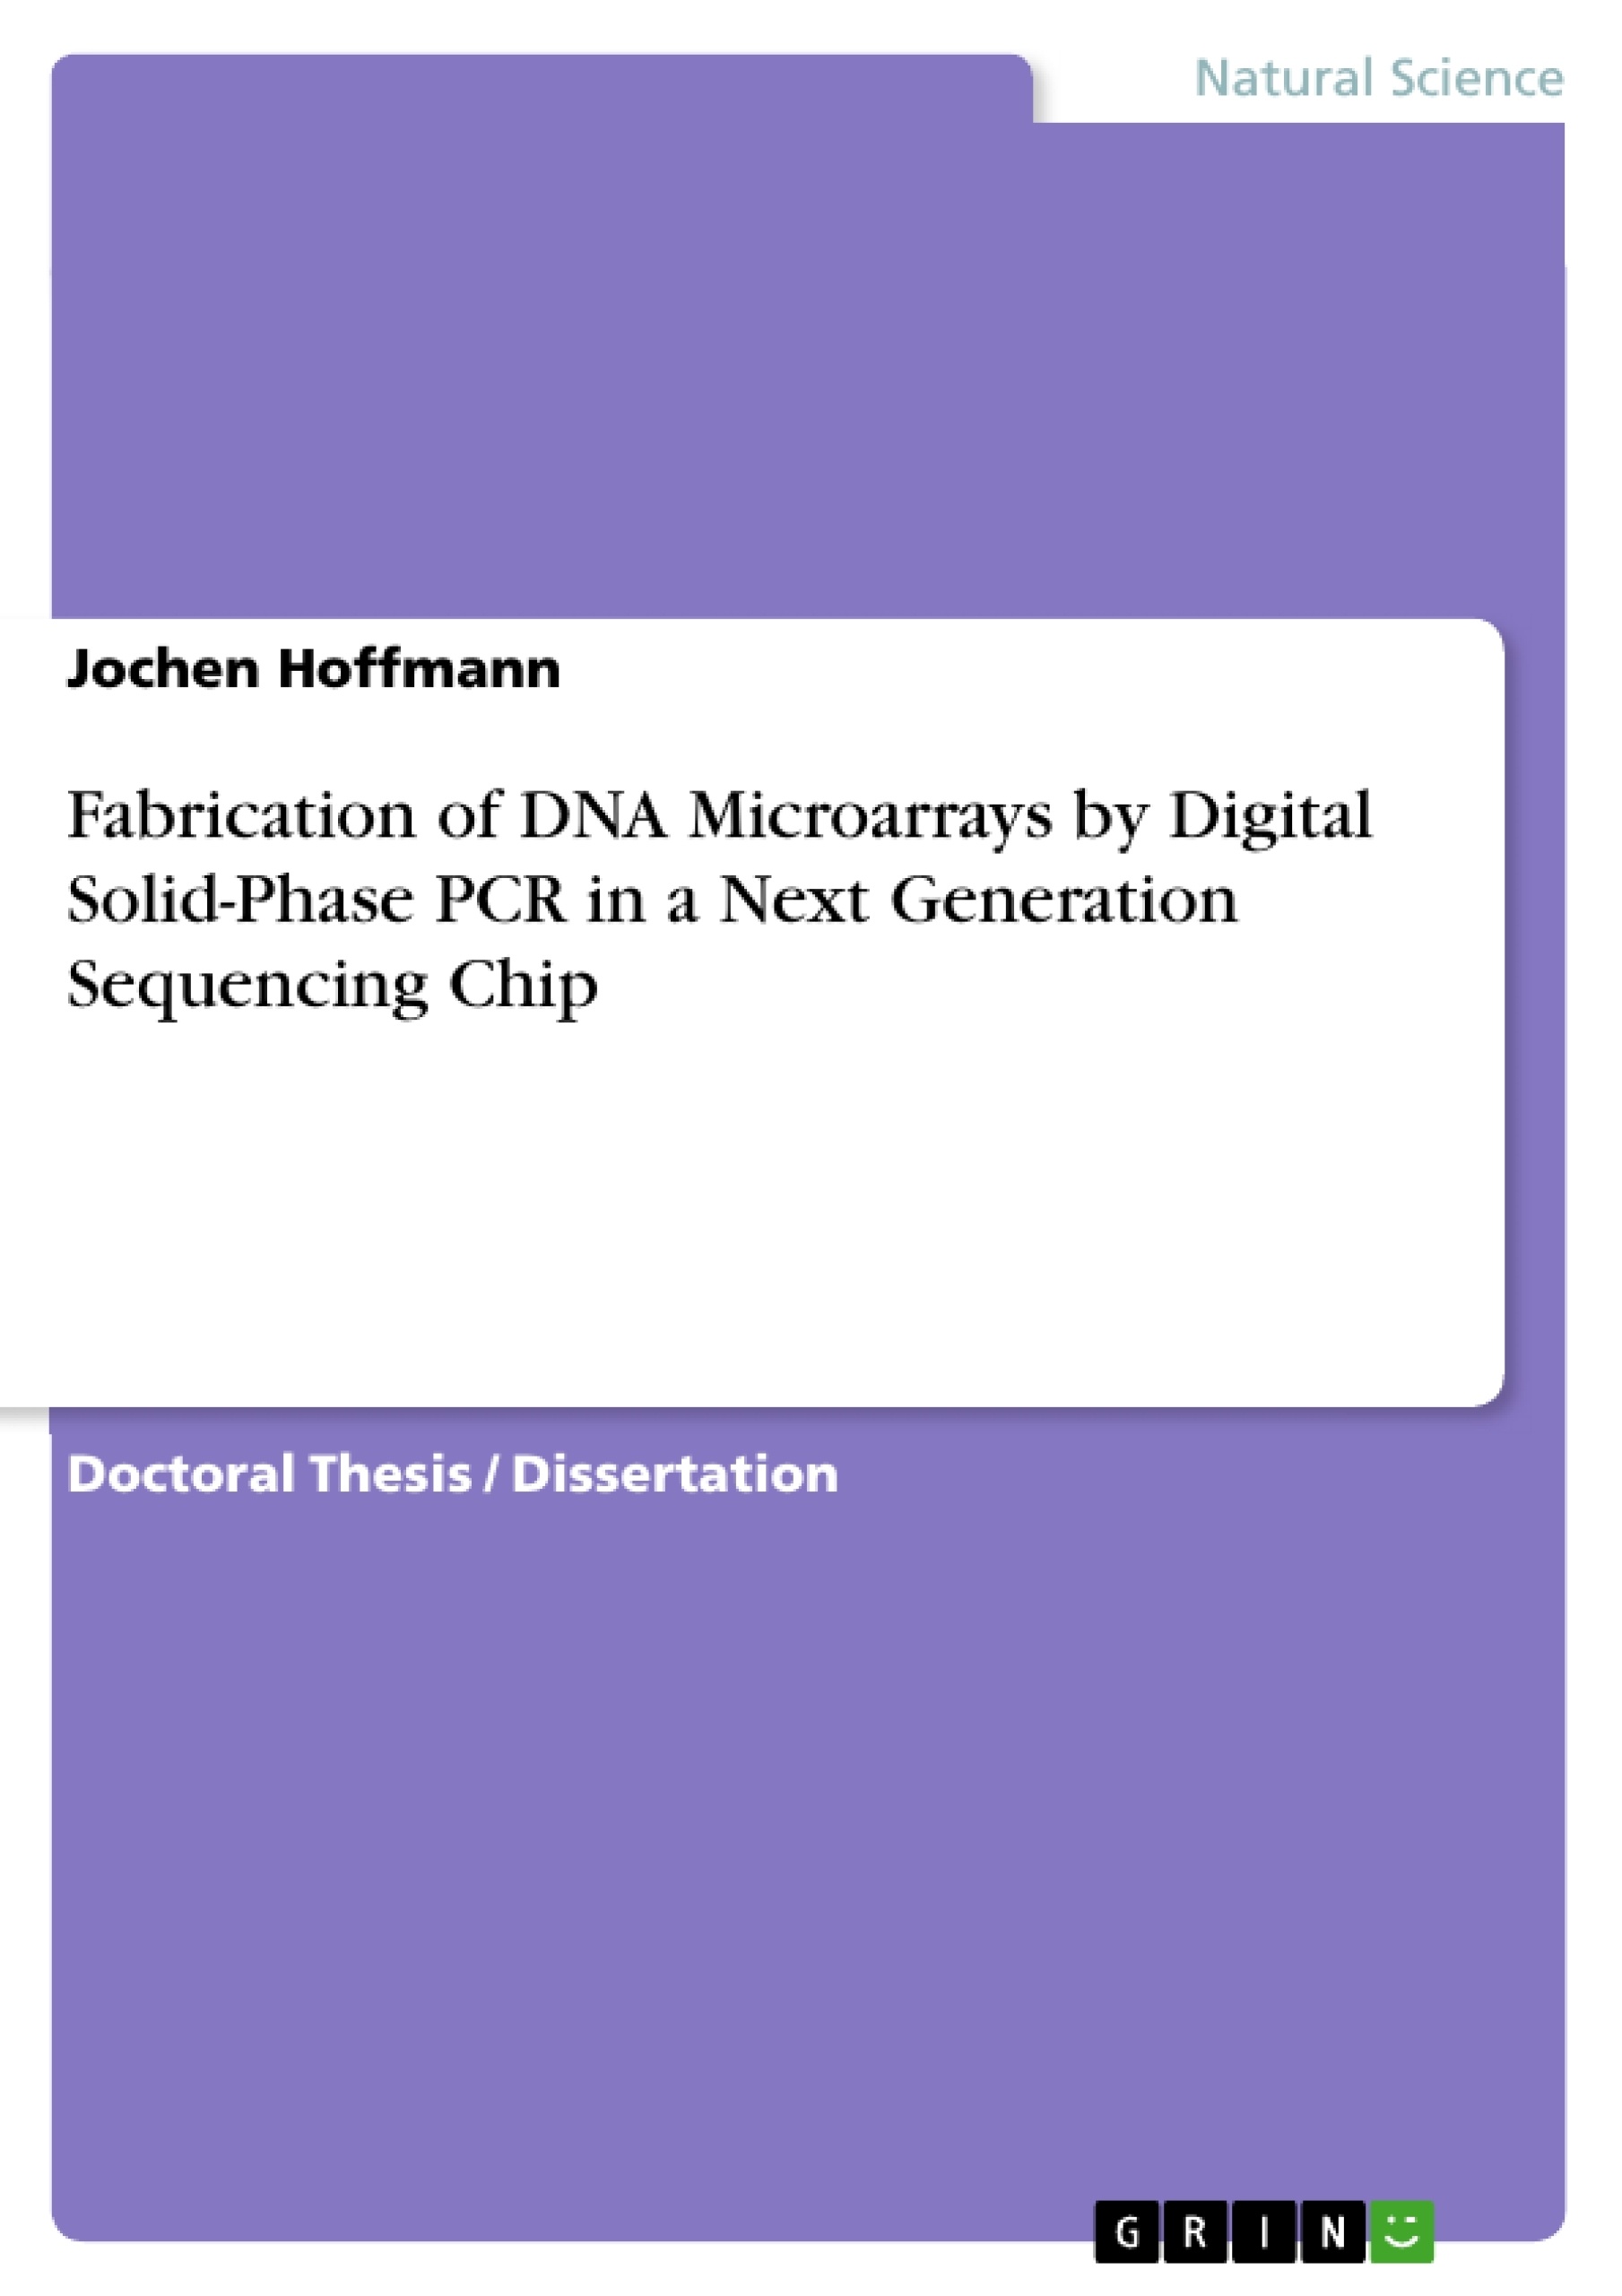 Titre: Fabrication of DNA Microarrays by Digital Solid-Phase PCR in a Next Generation Sequencing Chip